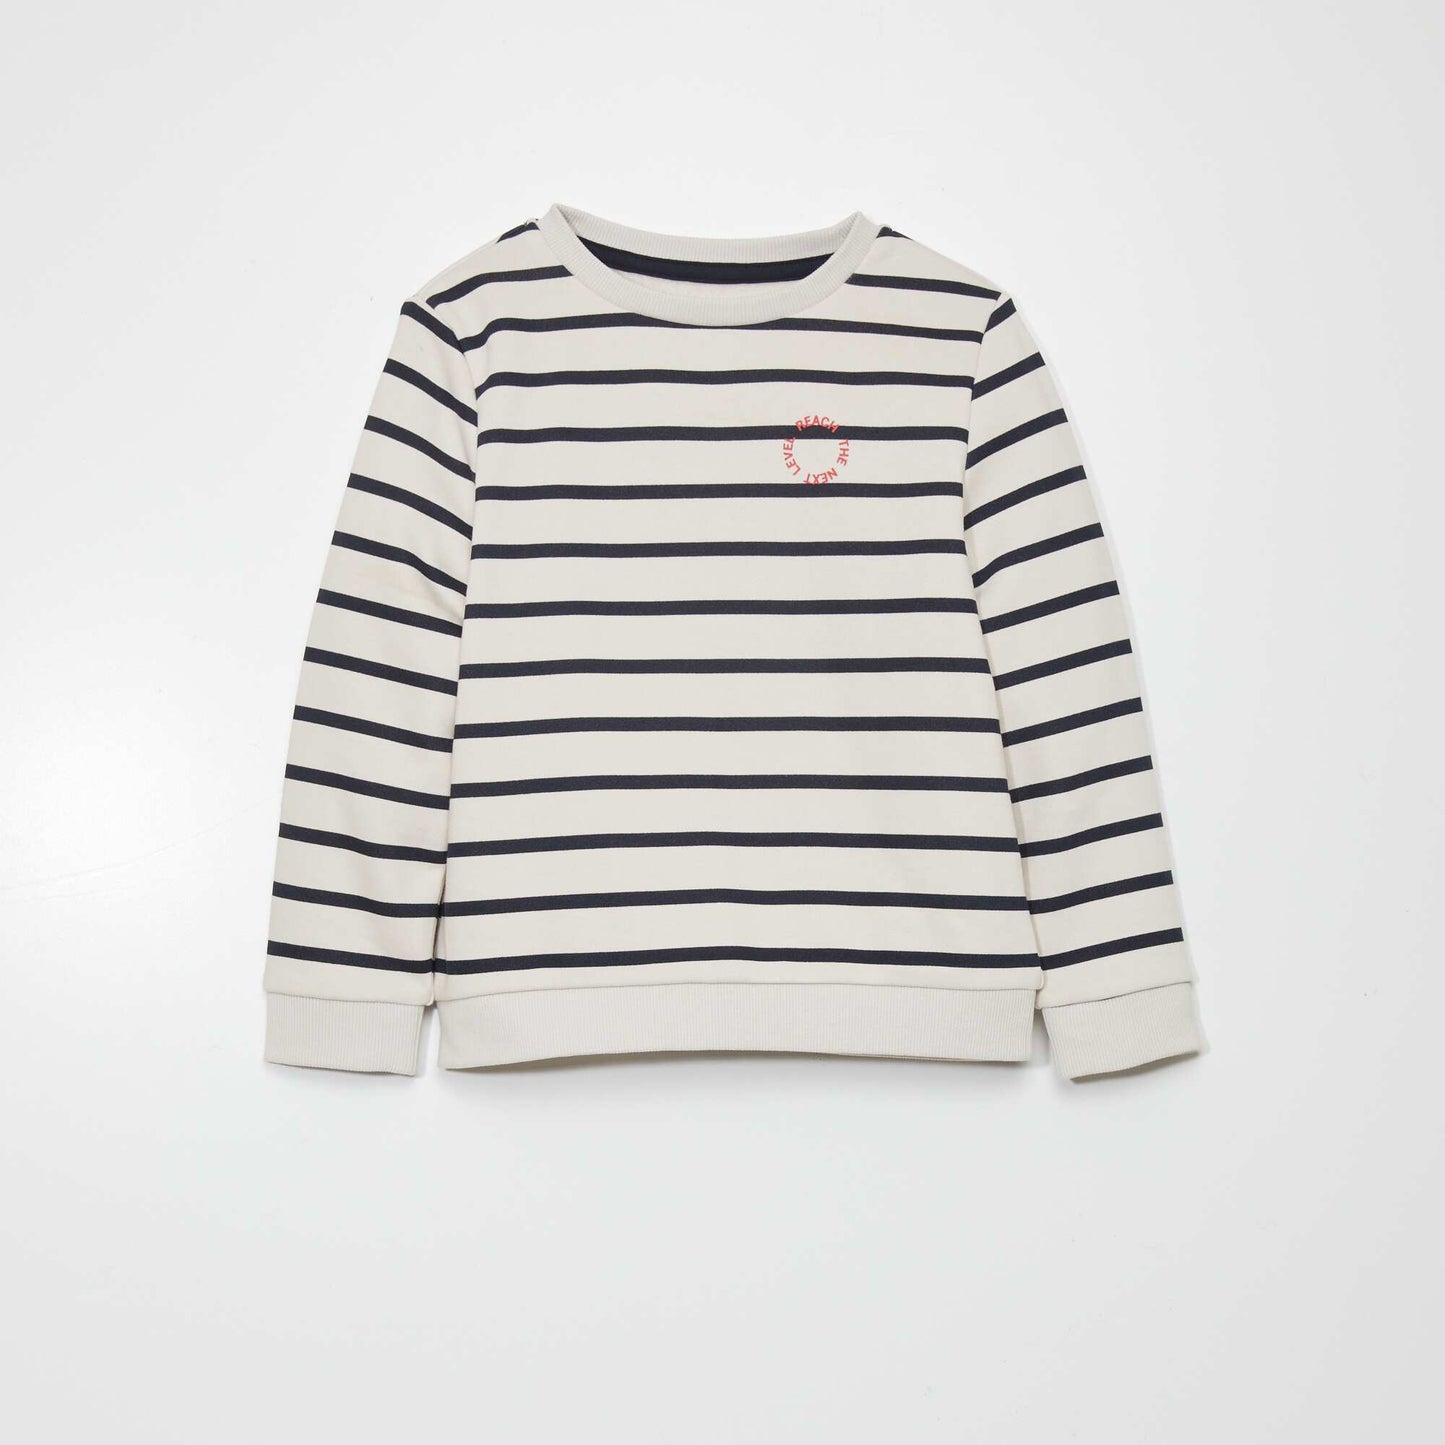 Sweatshirt fabric sweater with wide stripes White